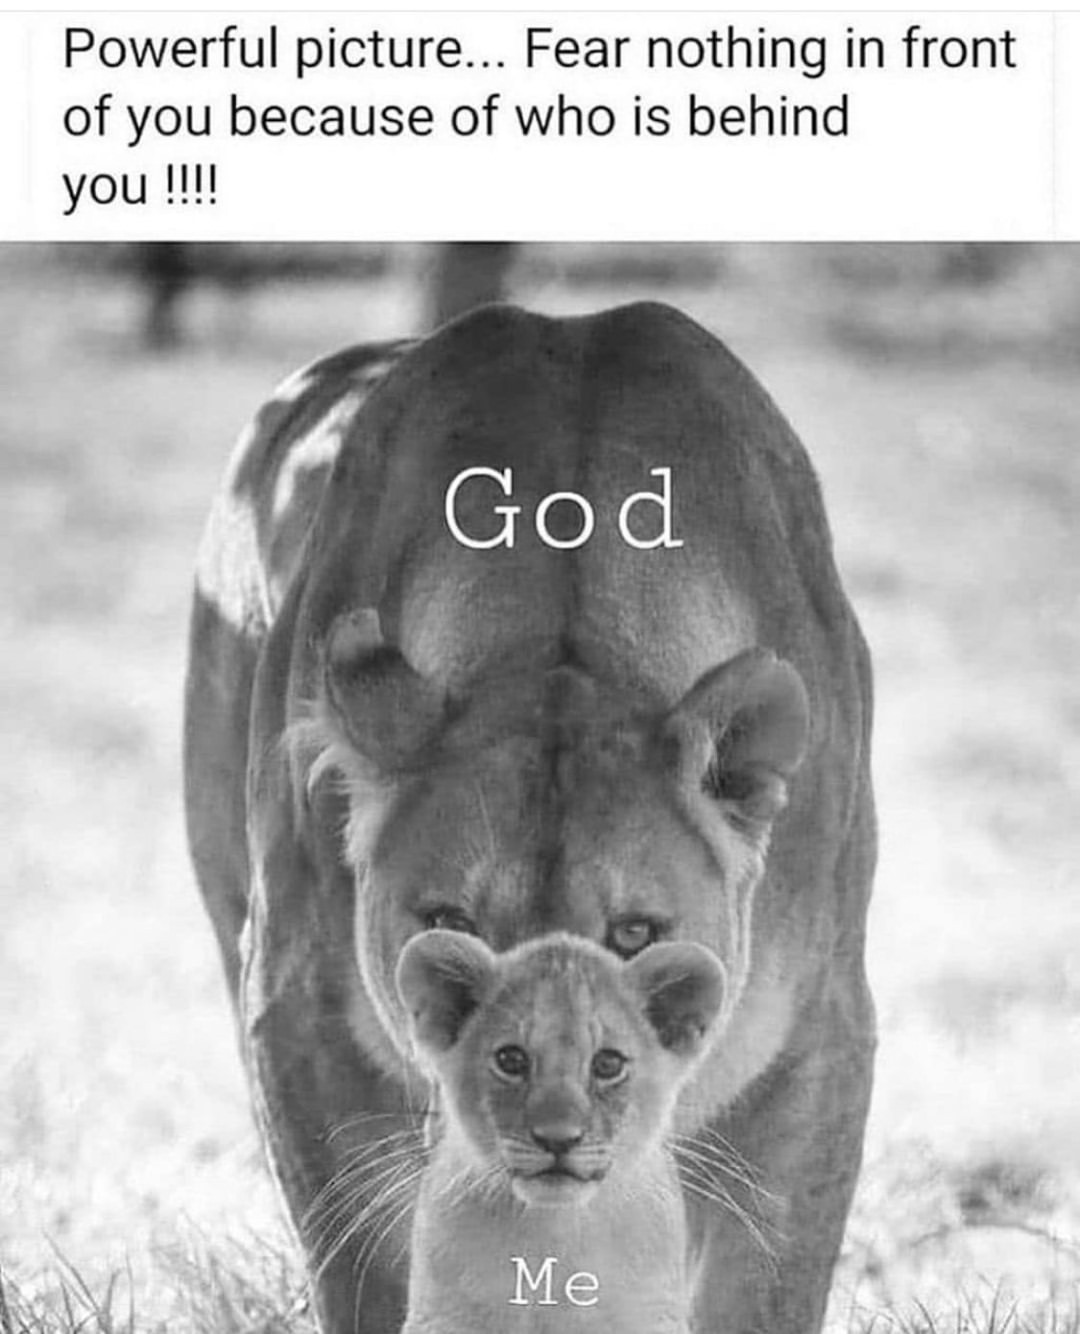 Powerful picture... Fear nothing in front of you because of who is behind you!!!! God.